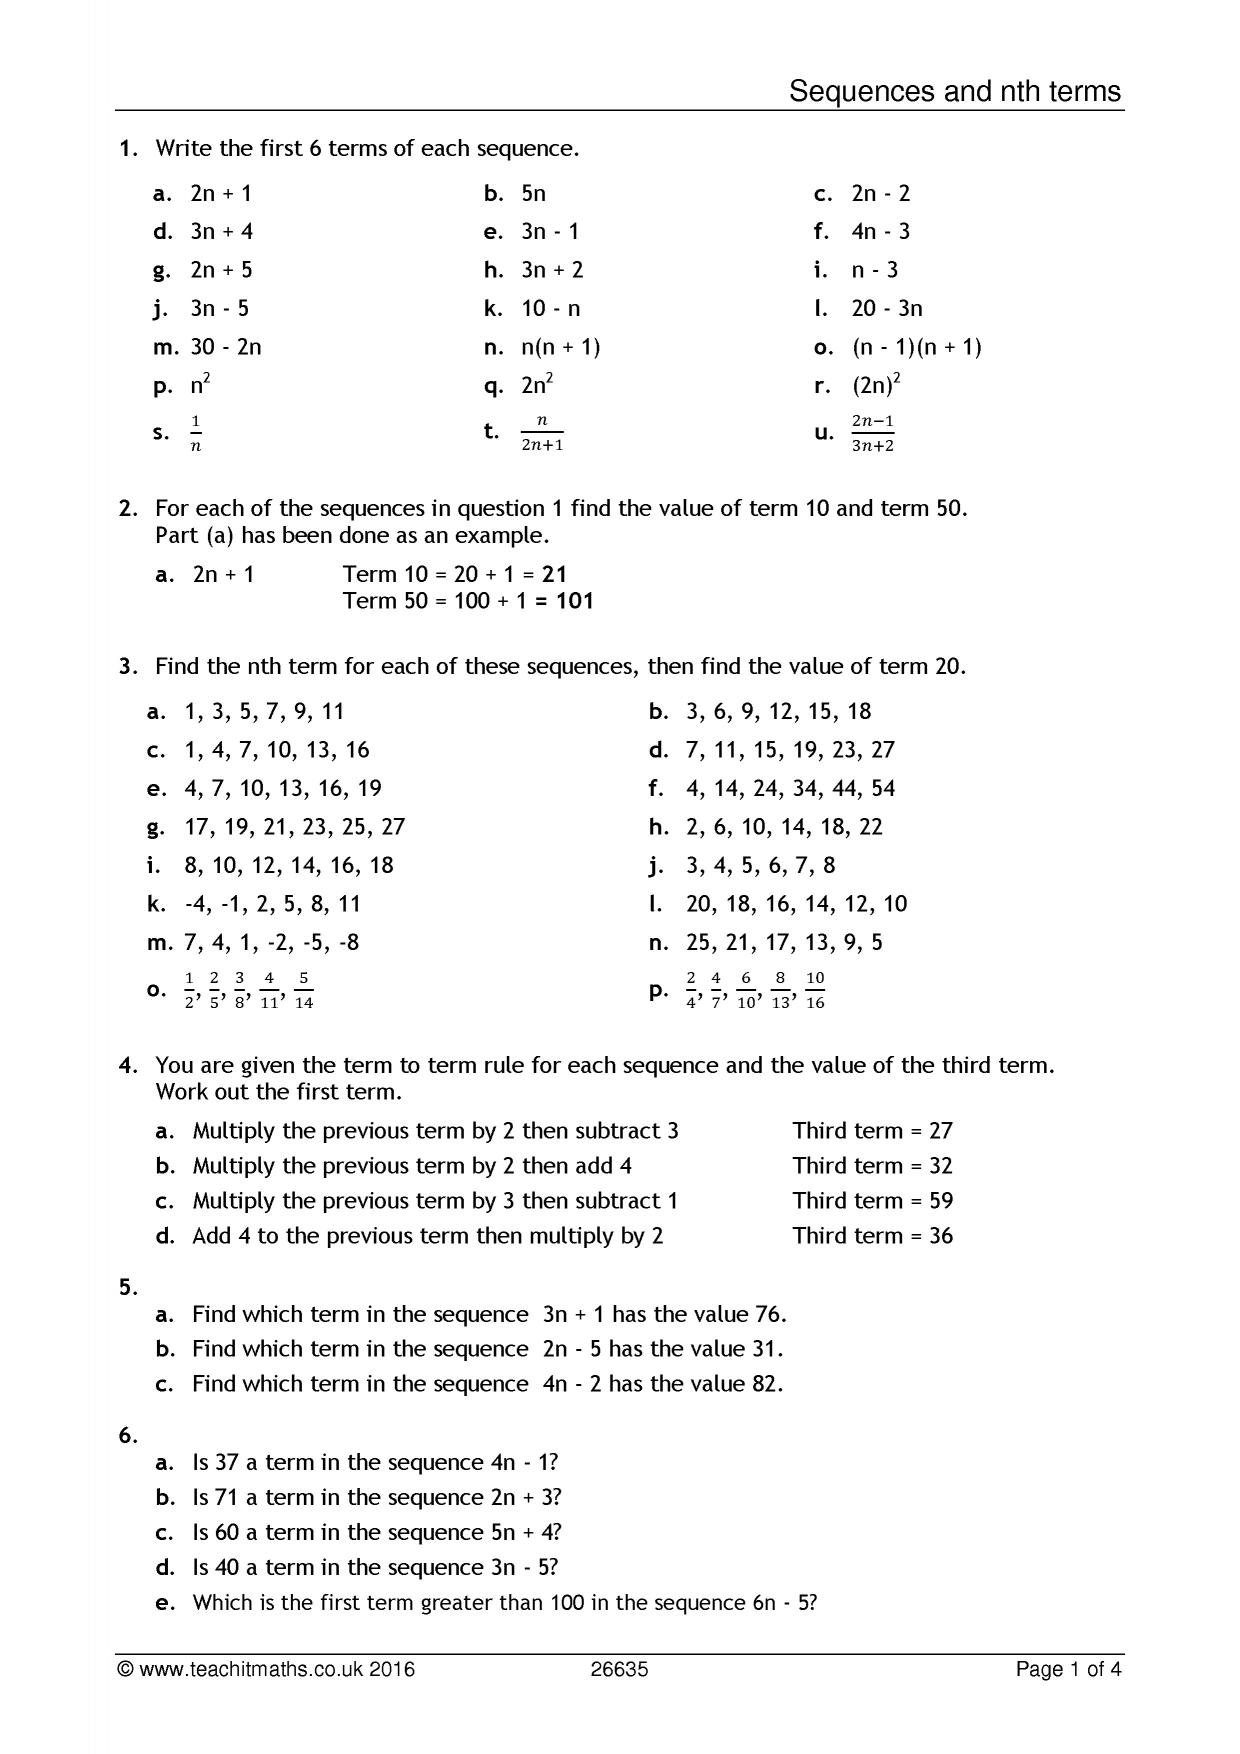 Sequences And Nth Terms Worksheet Pdf  Teachit Maths Or Arithmetic Sequence Worksheet Pdf